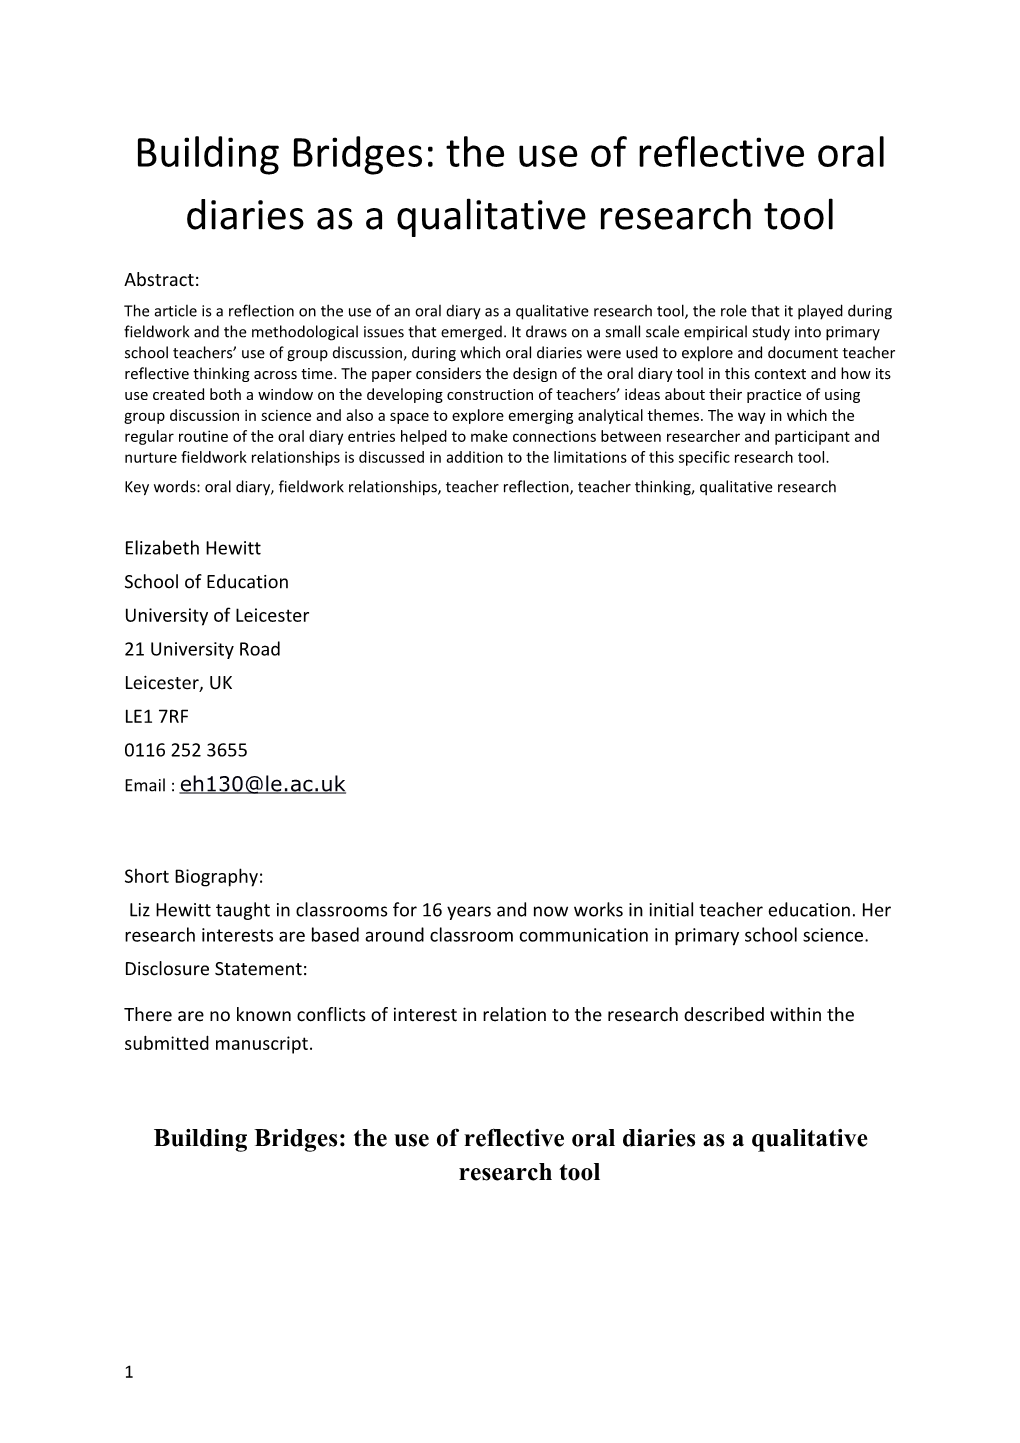 Building Bridges: the Use of Reflective Oral Diaries As a Qualitative Research Tool